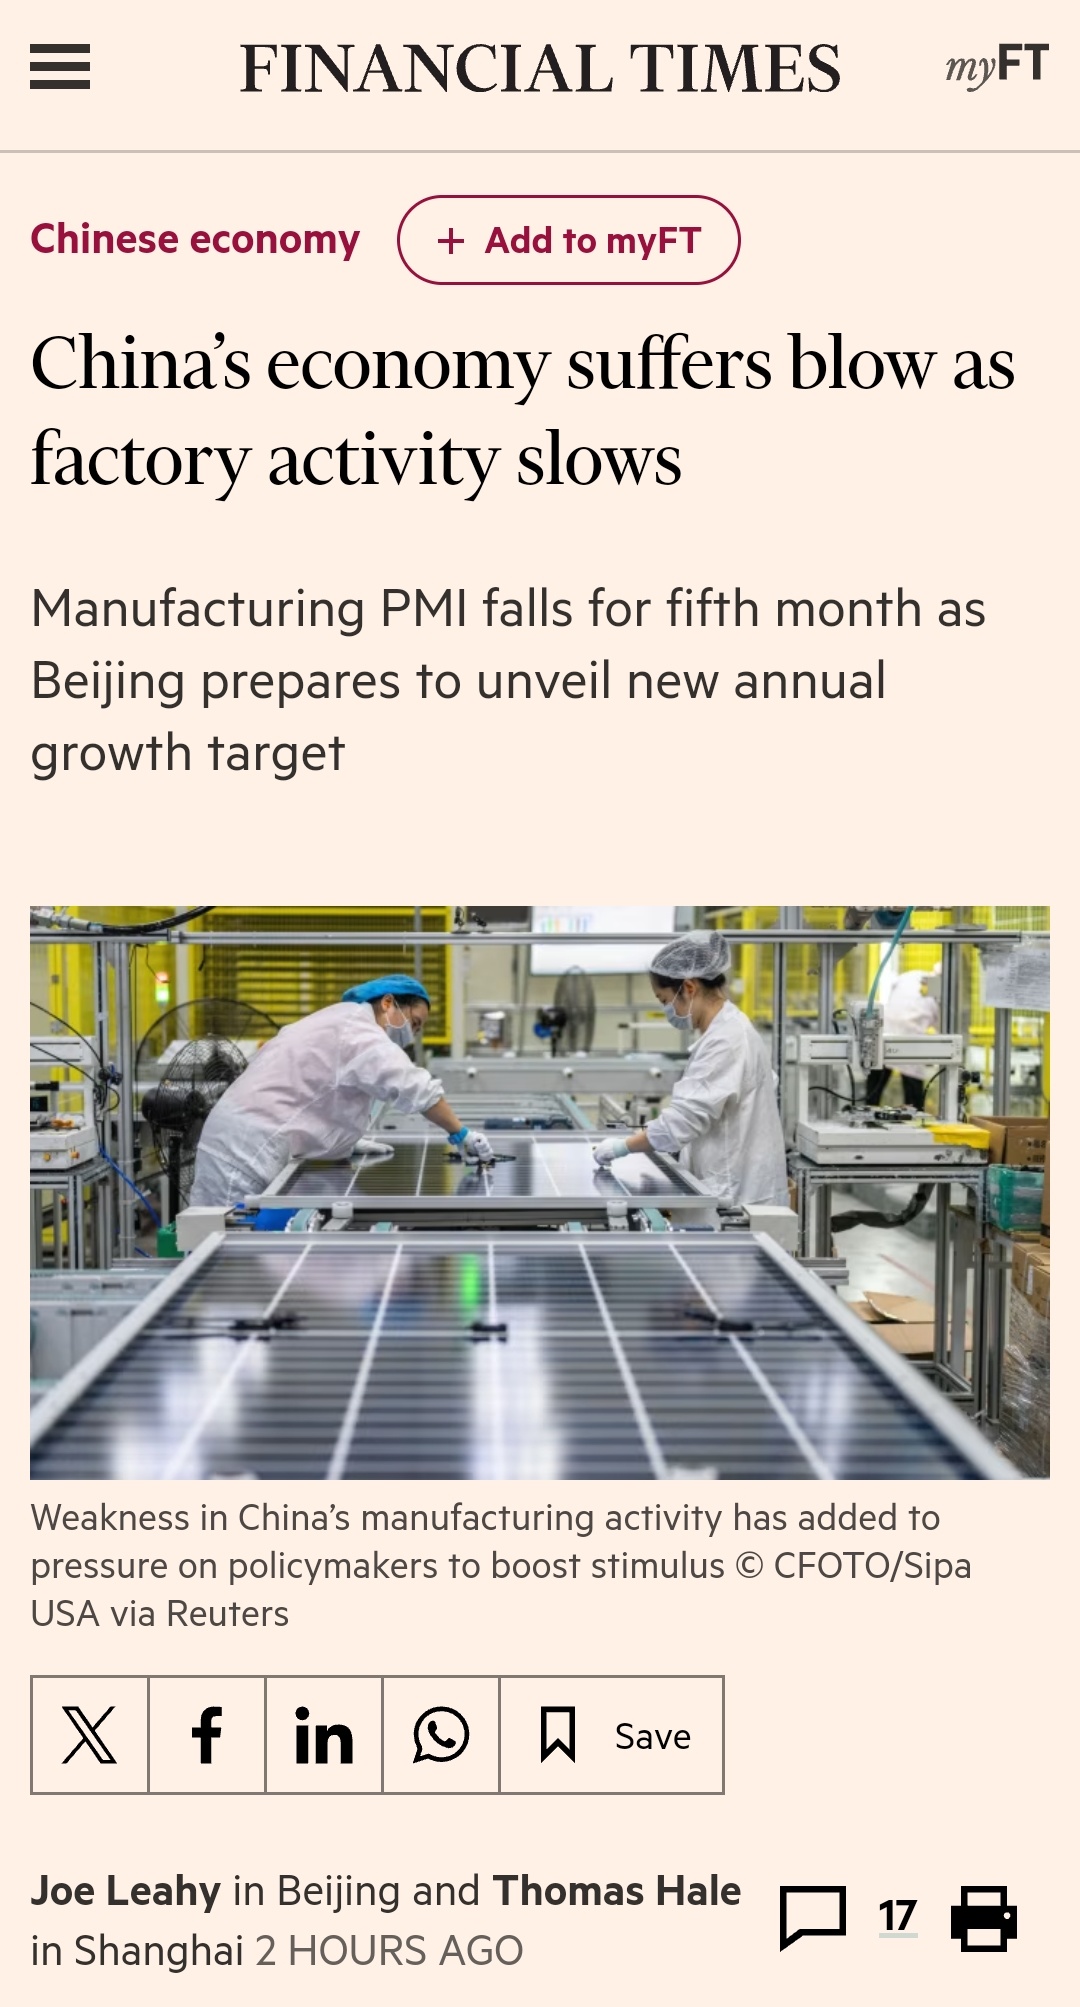 China’s economy suffers blow as factory activity slows